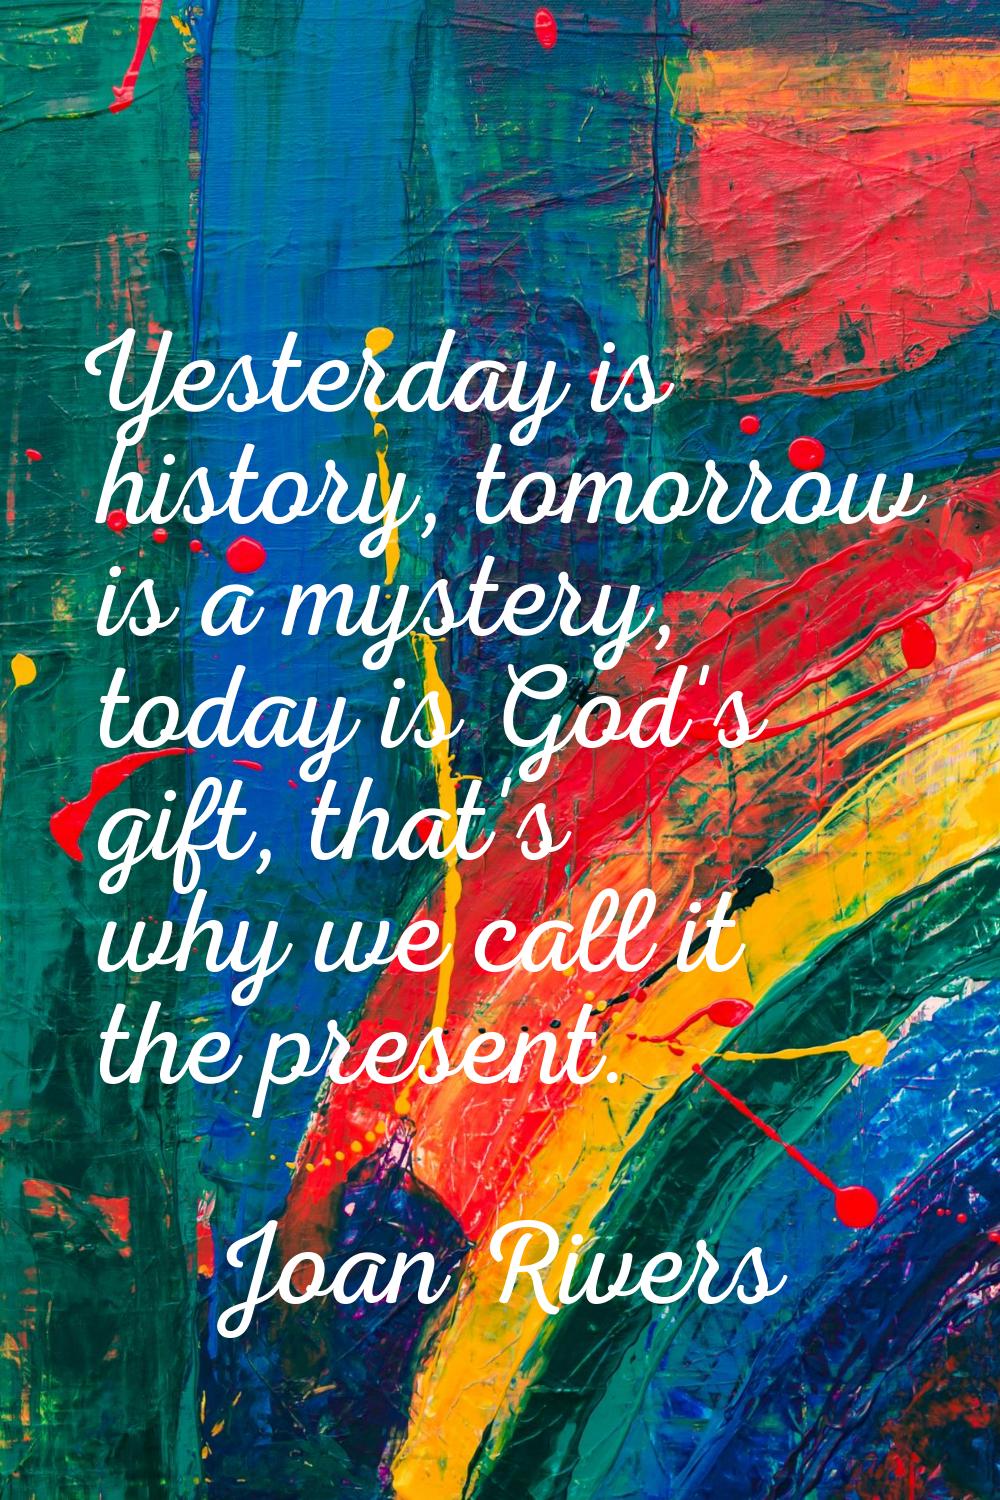 Yesterday is history, tomorrow is a mystery, today is God's gift, that's why we call it the present